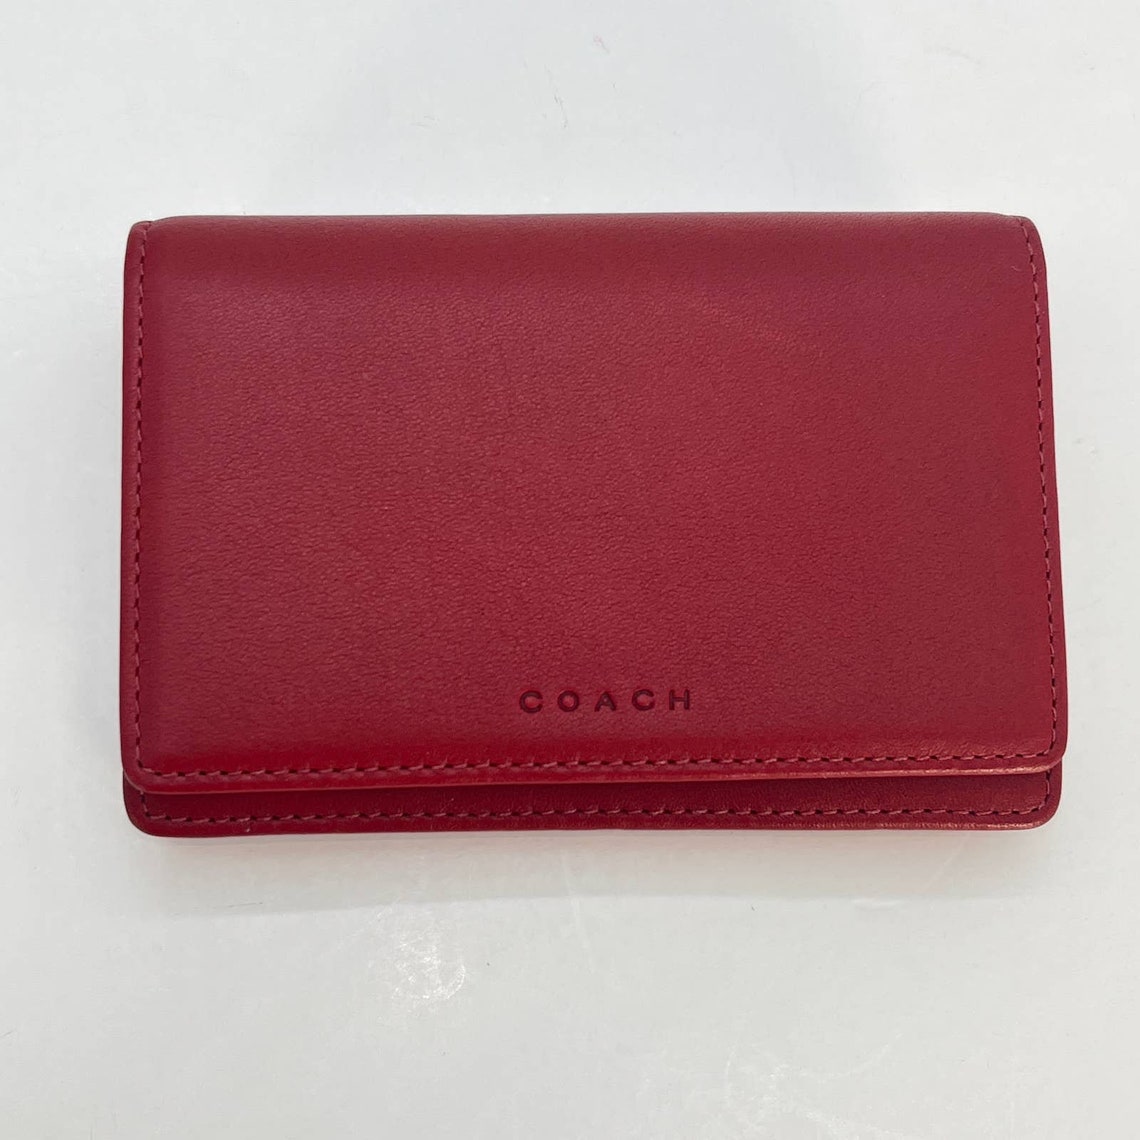 NEW Vintage Coach Multi-function Wallet 6994 Red - Etsy